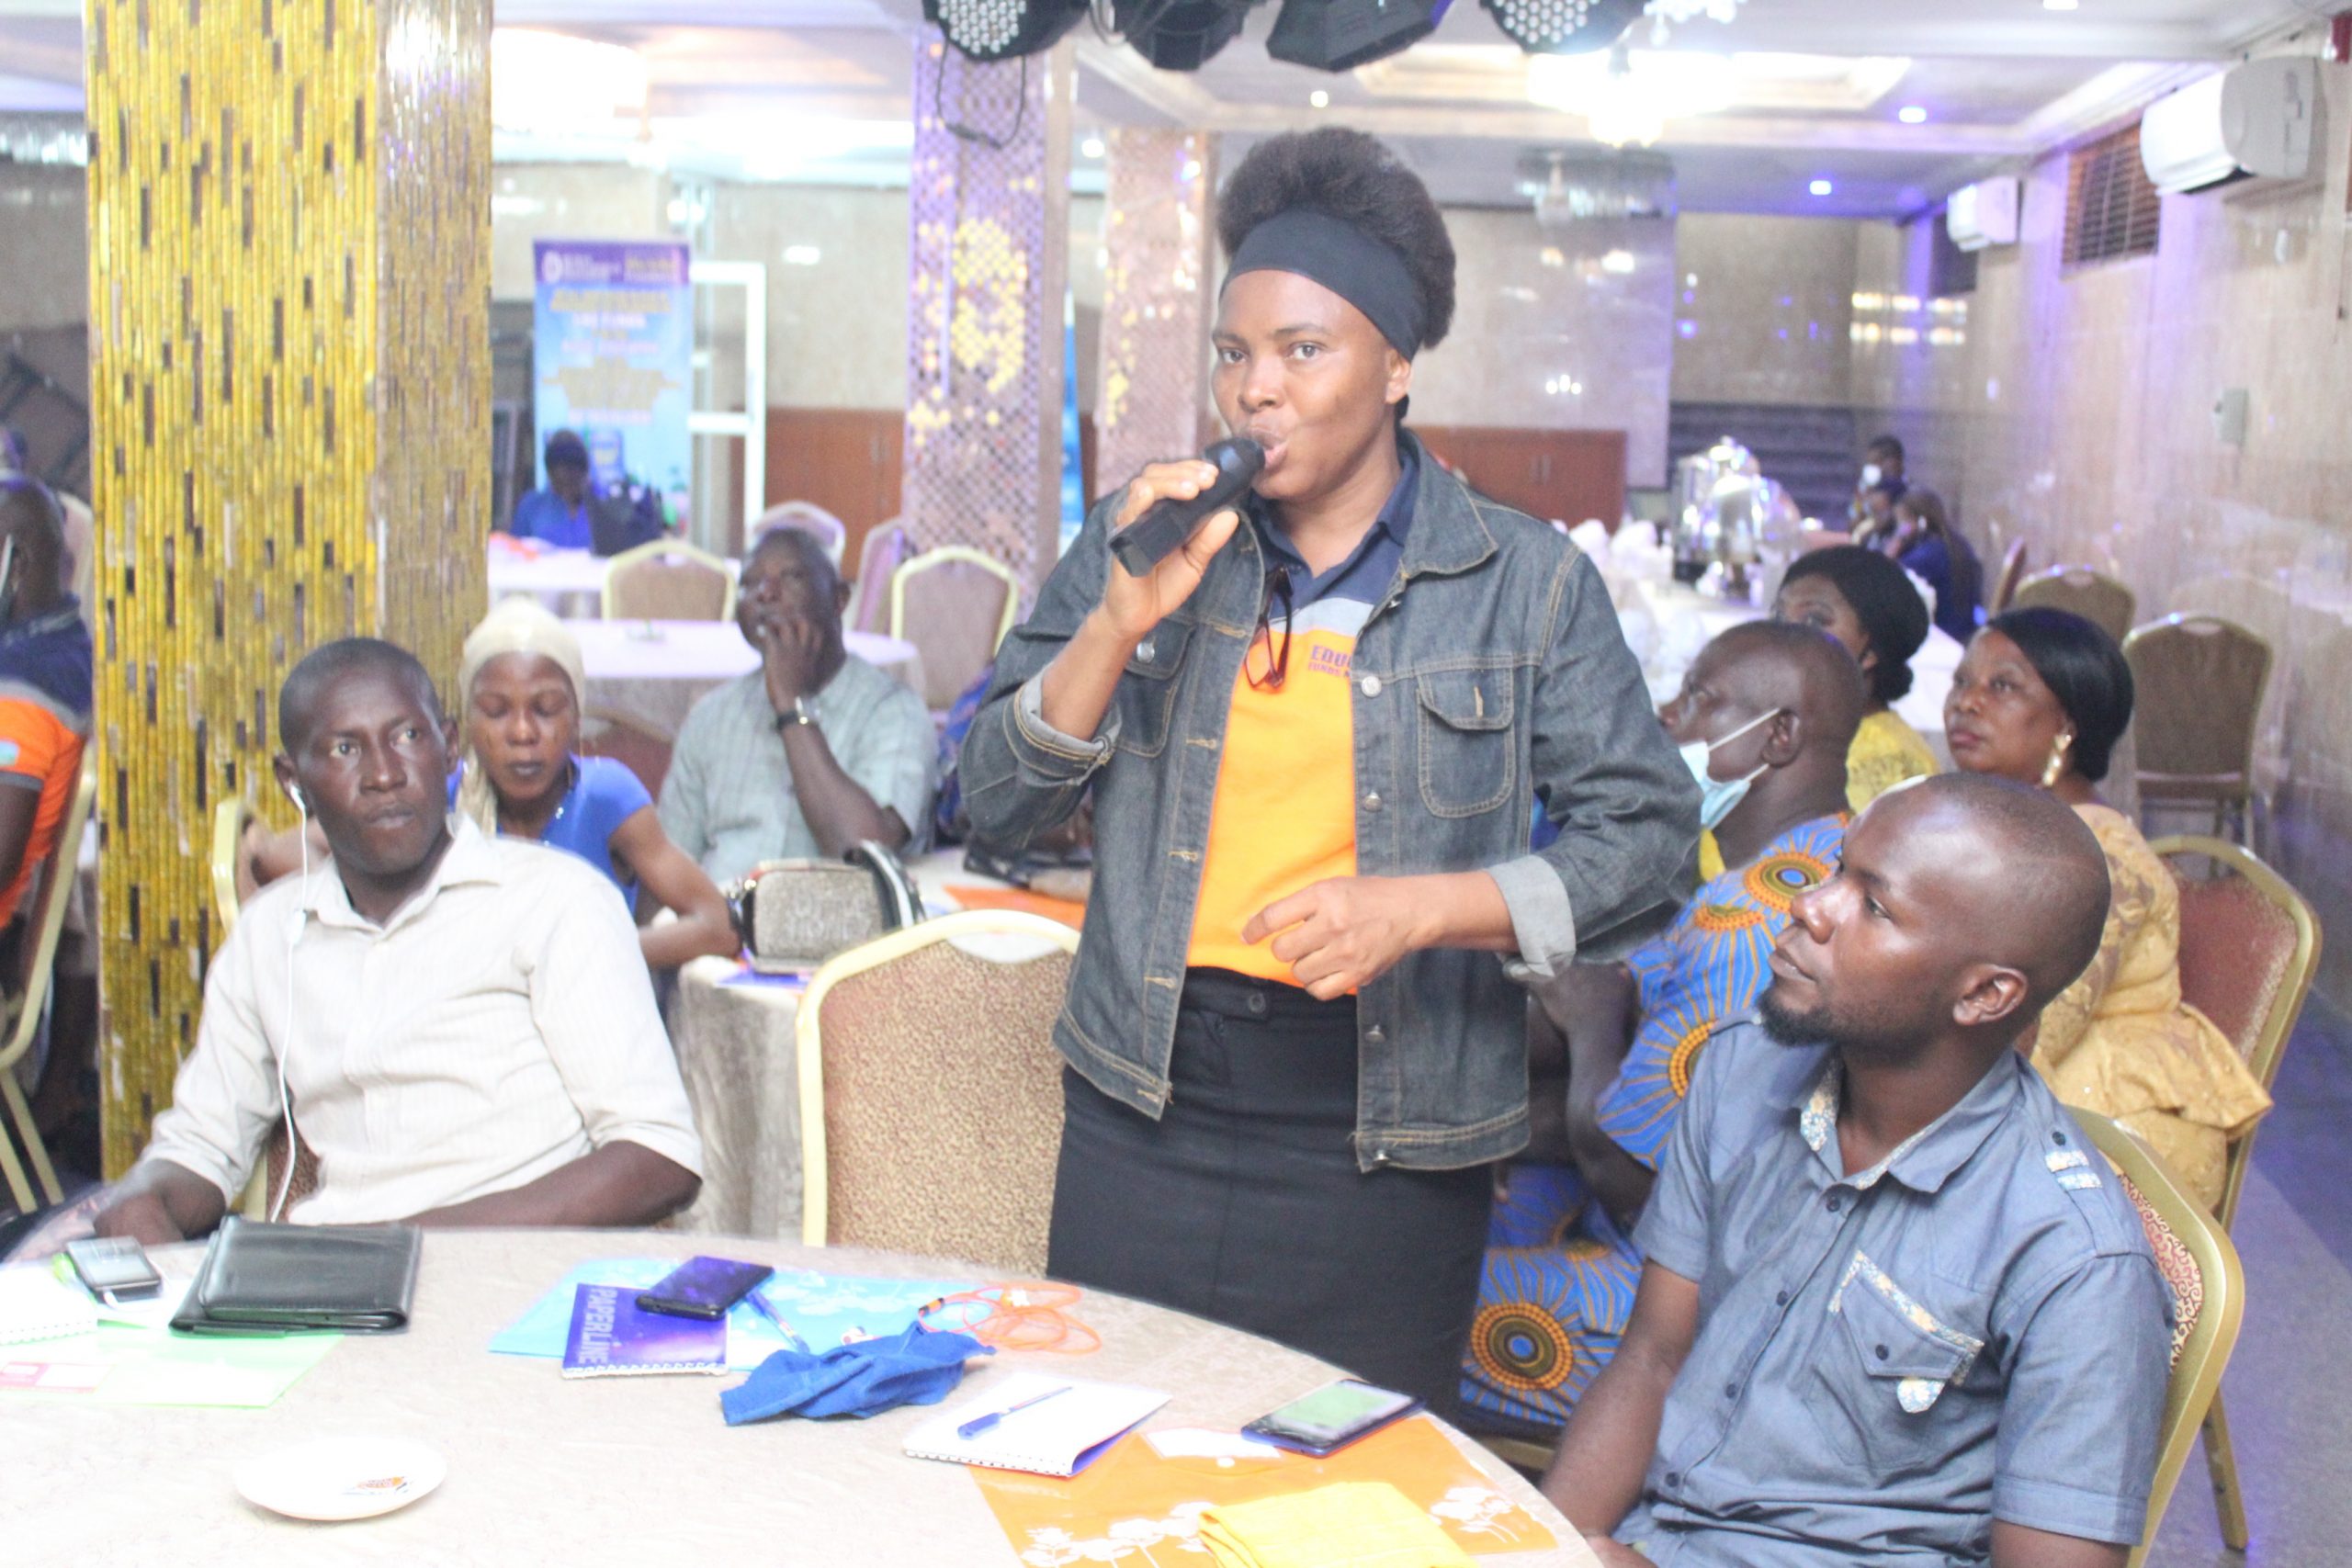 HDI CALLS ON STAKEHOLDERS TO MONITOR UBE PROJECTS IN THEIR COMMUNITIES